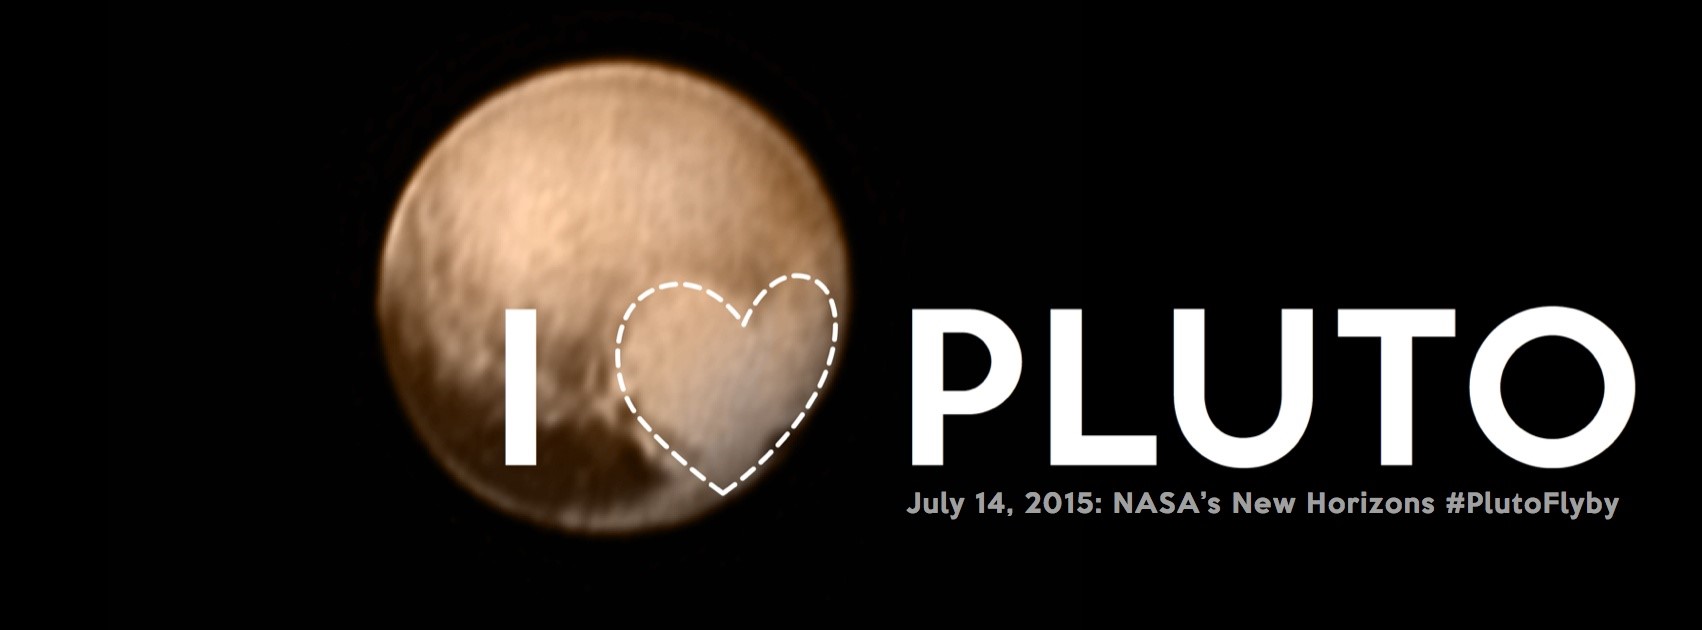 I Heart Pluto: A whimsical, artistic twist on one of the Pluto approach pictures. Credit: NASA/Johns Hopkins Applied Physics Laboratory/Southwest Research Institute